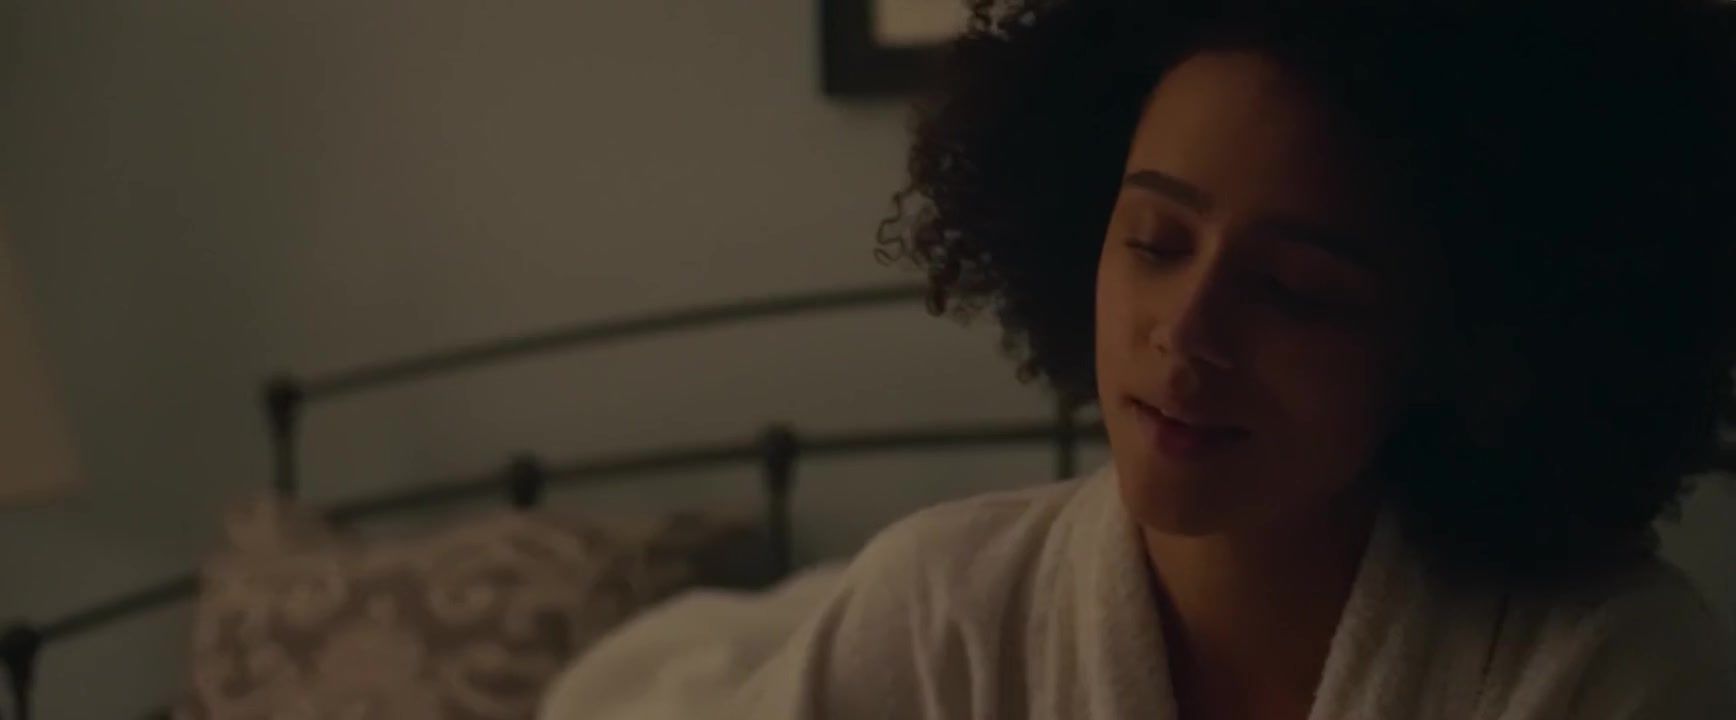 Adulter.Club Black Nathalie Emmanuel joins white co-star Britt Lower nude in Holly Slept Over (2020) Seduction